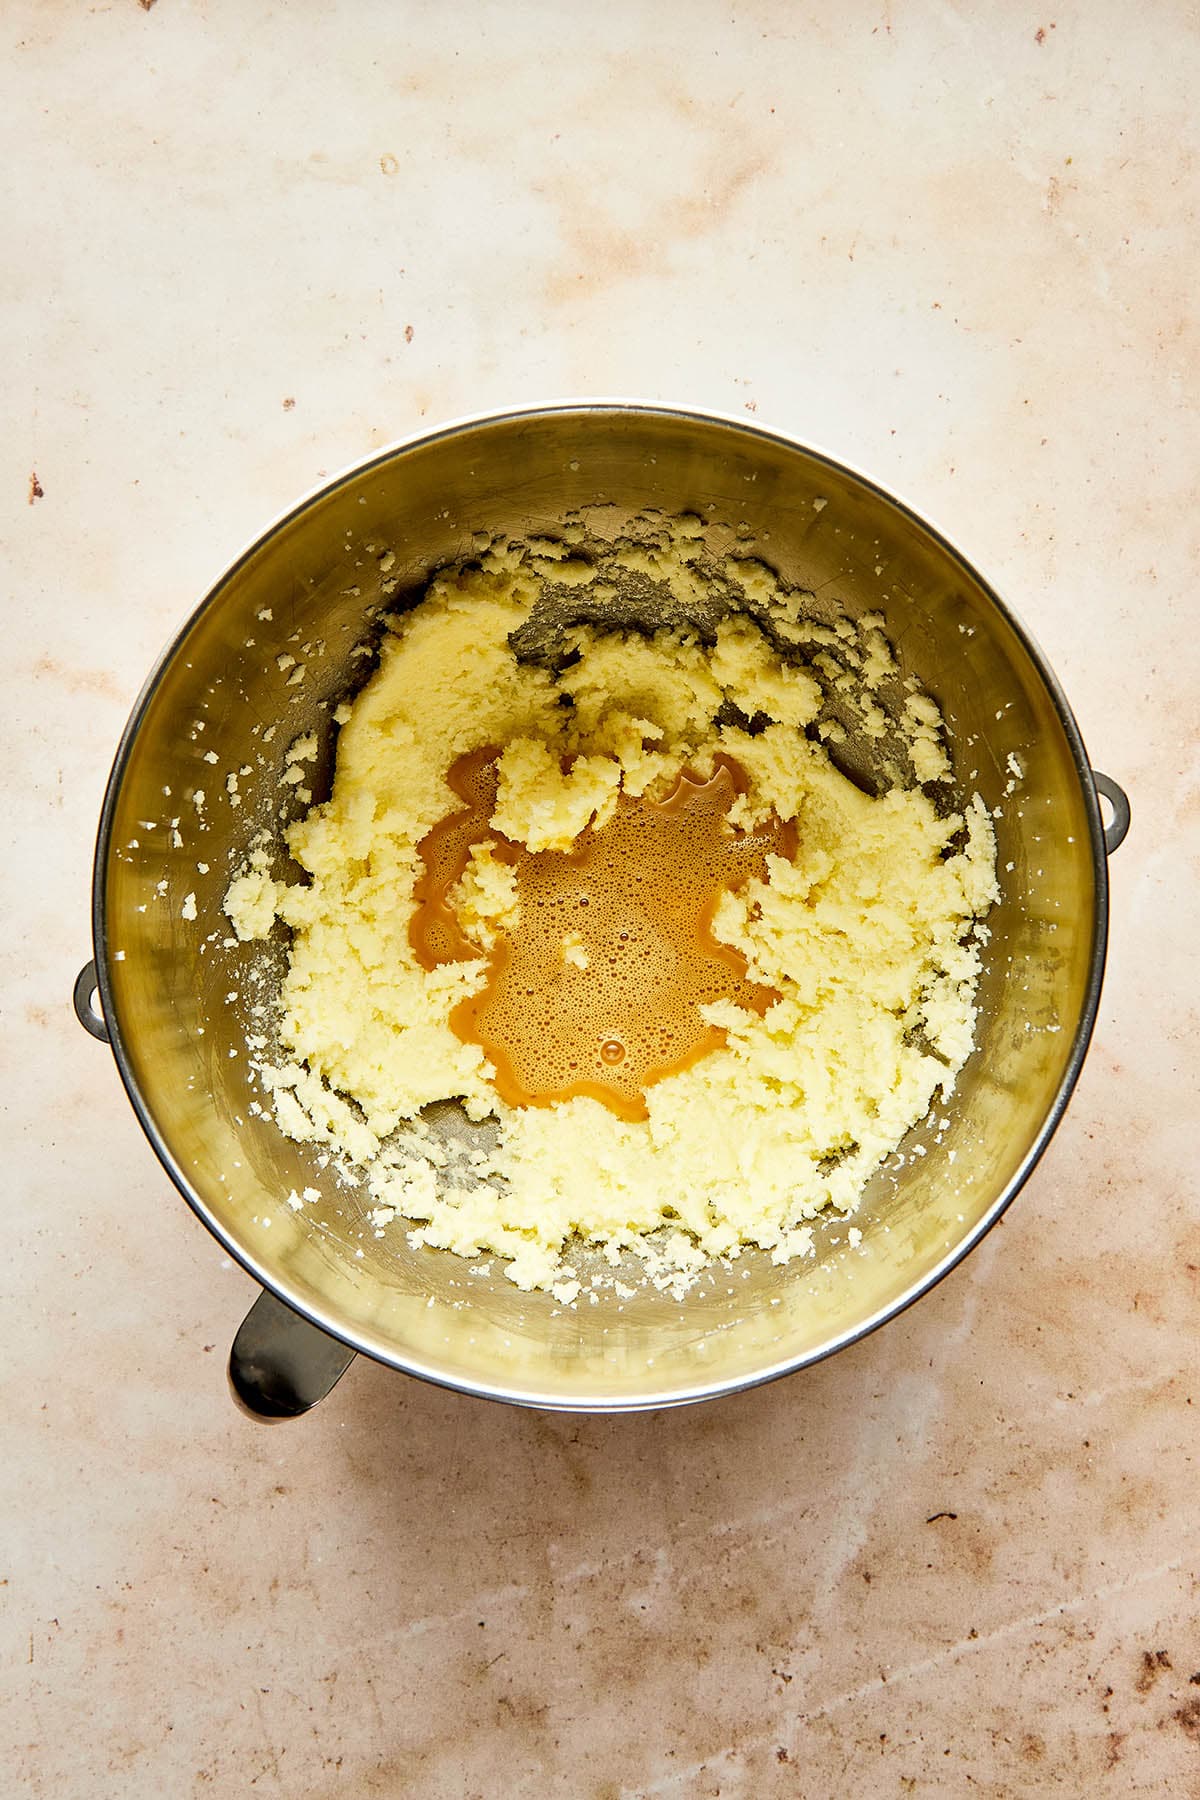 Whisked egg, milk, light coen syrup, and vanilla that's been poured into a metal mixing bowl of whipped butter and sugar.